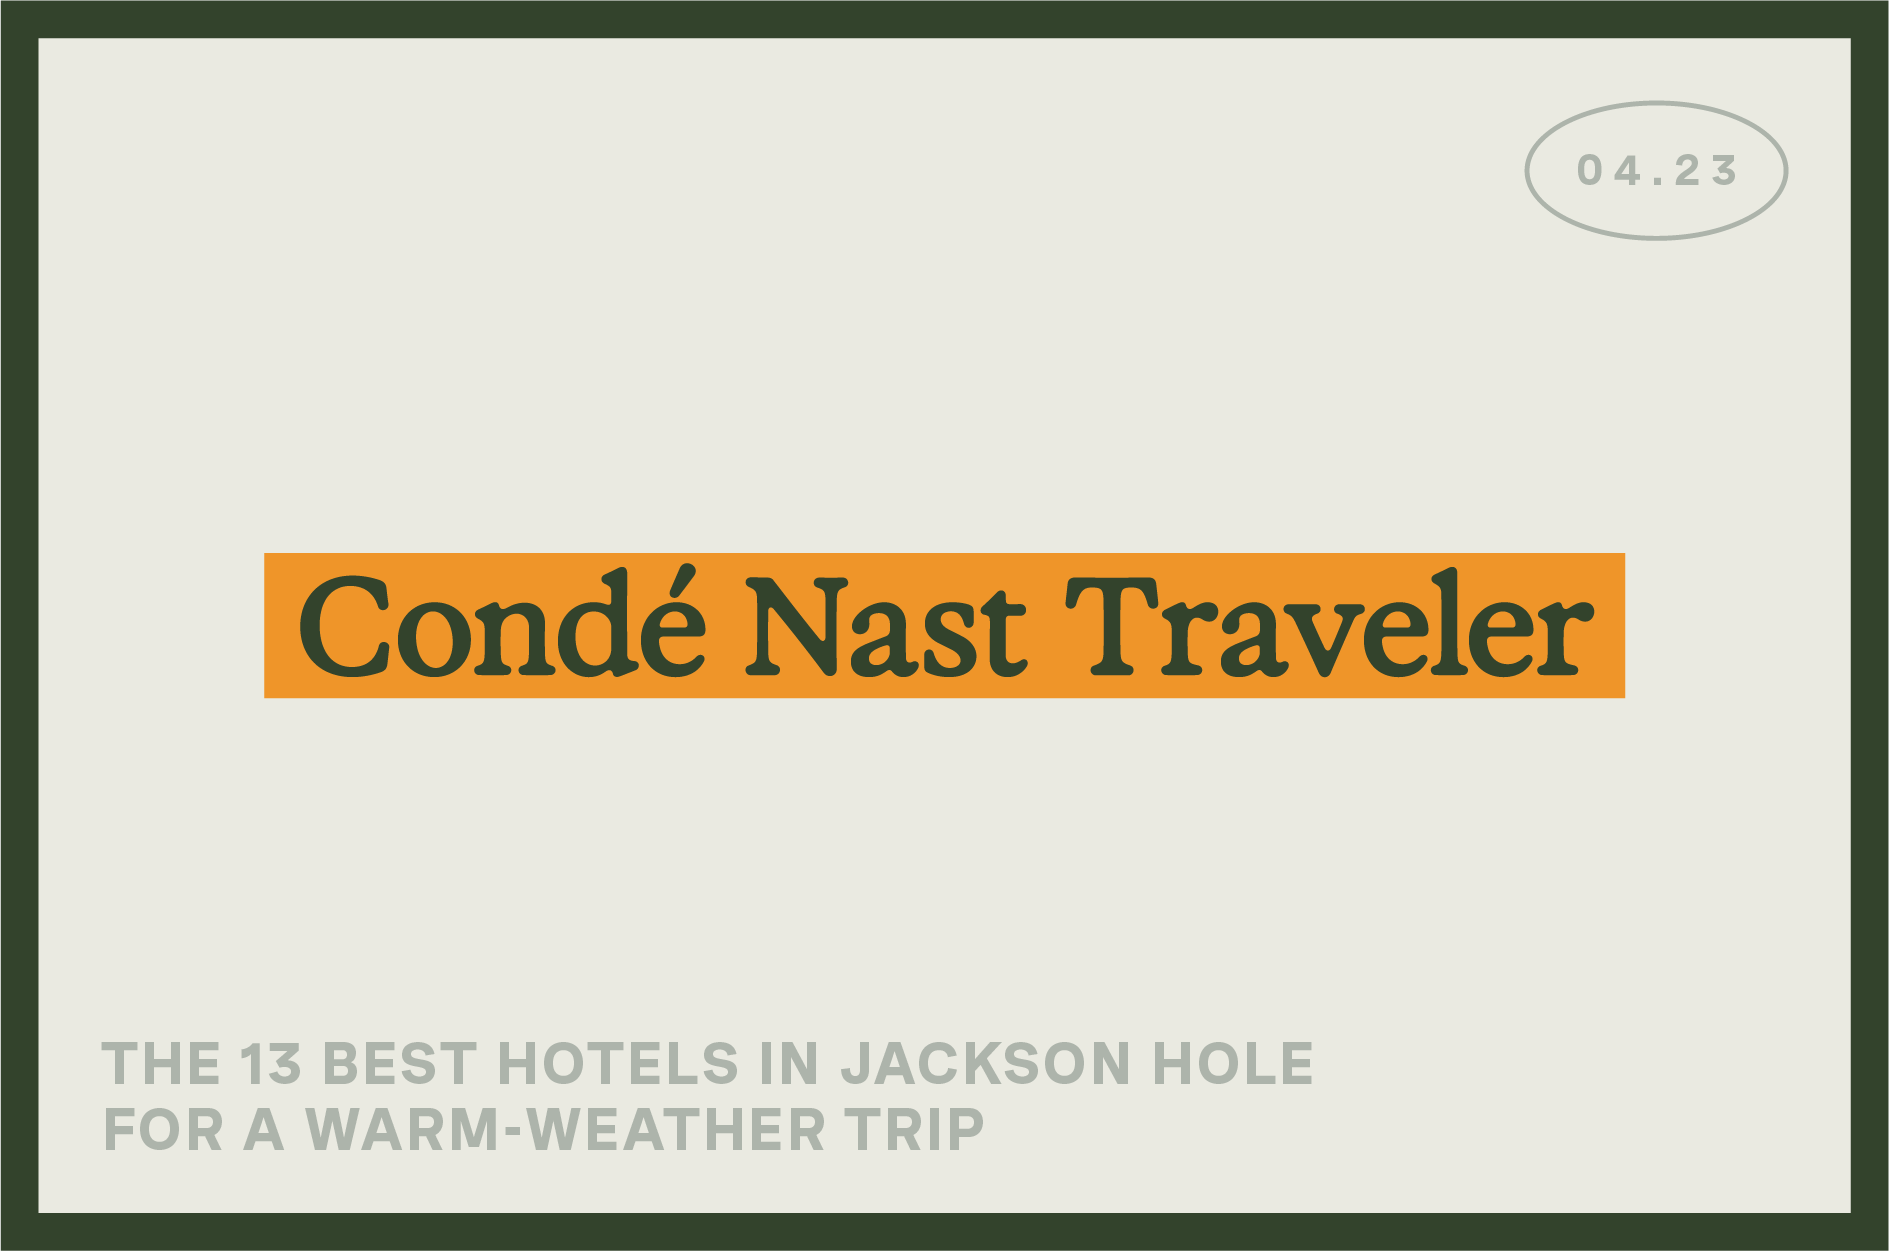 "Conde Nast Traveler" banner highlights "The 13 best hotels in Jackson Hole" for warm-weather trips.